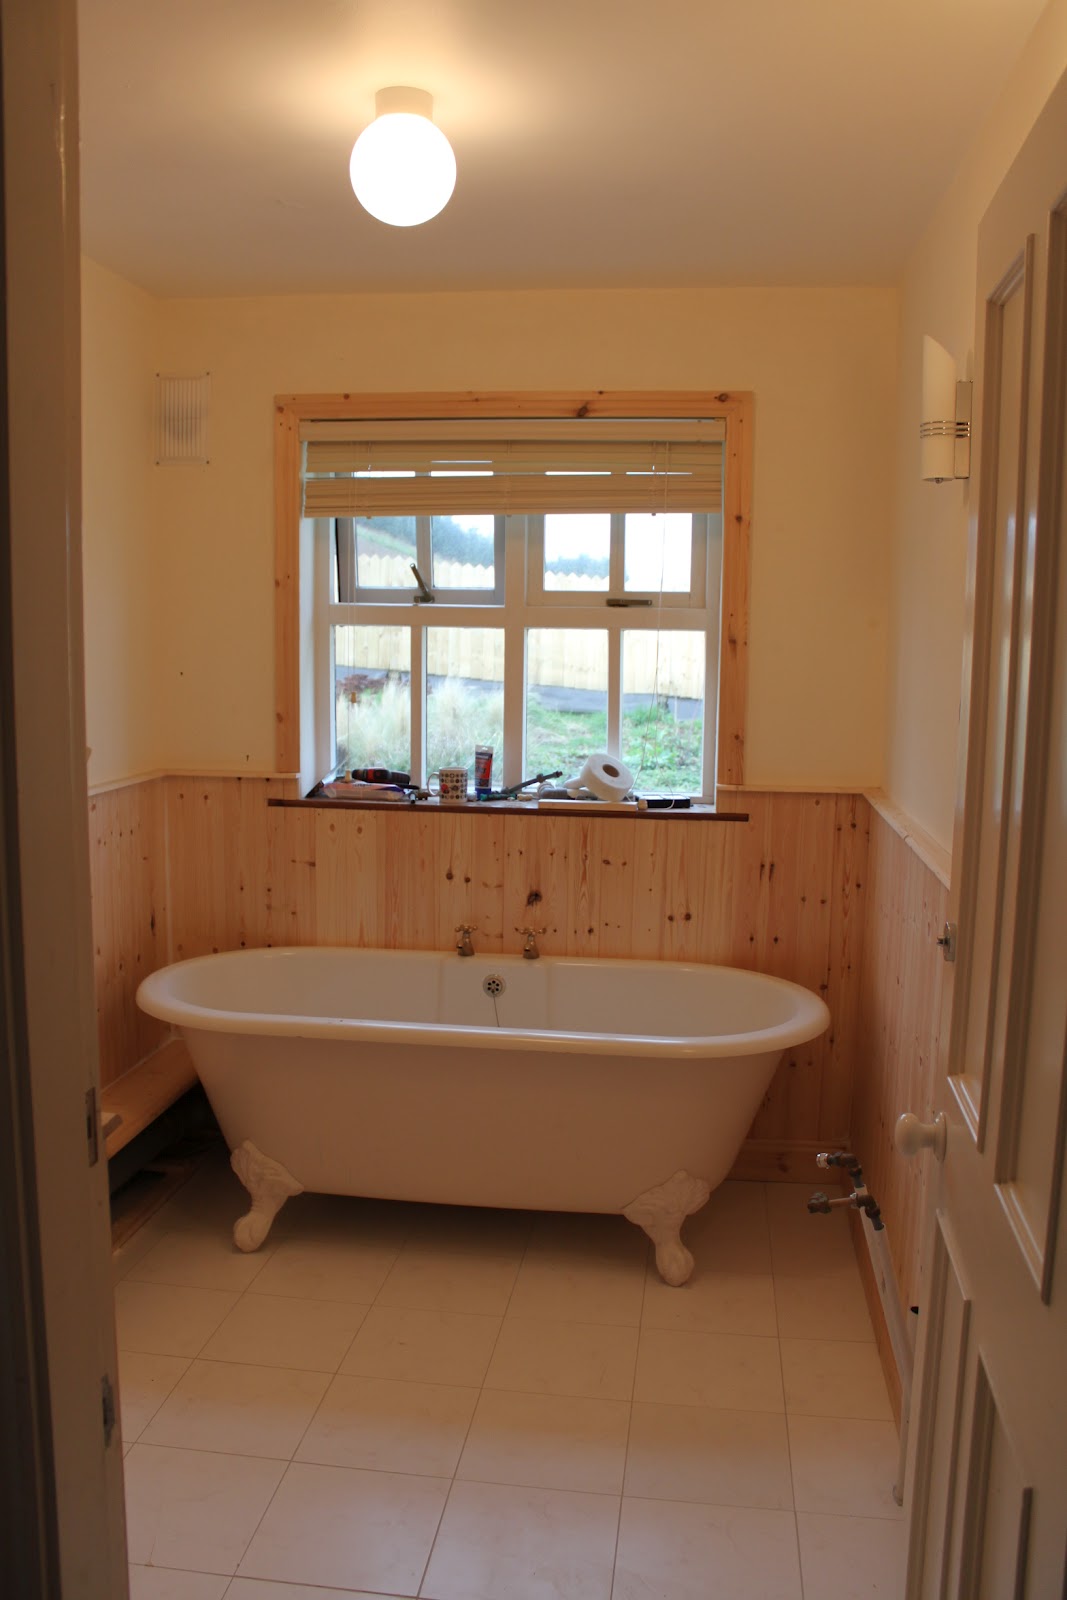 bathroom shower window love tongue in groove panelling, I decided to go for this over tiles 